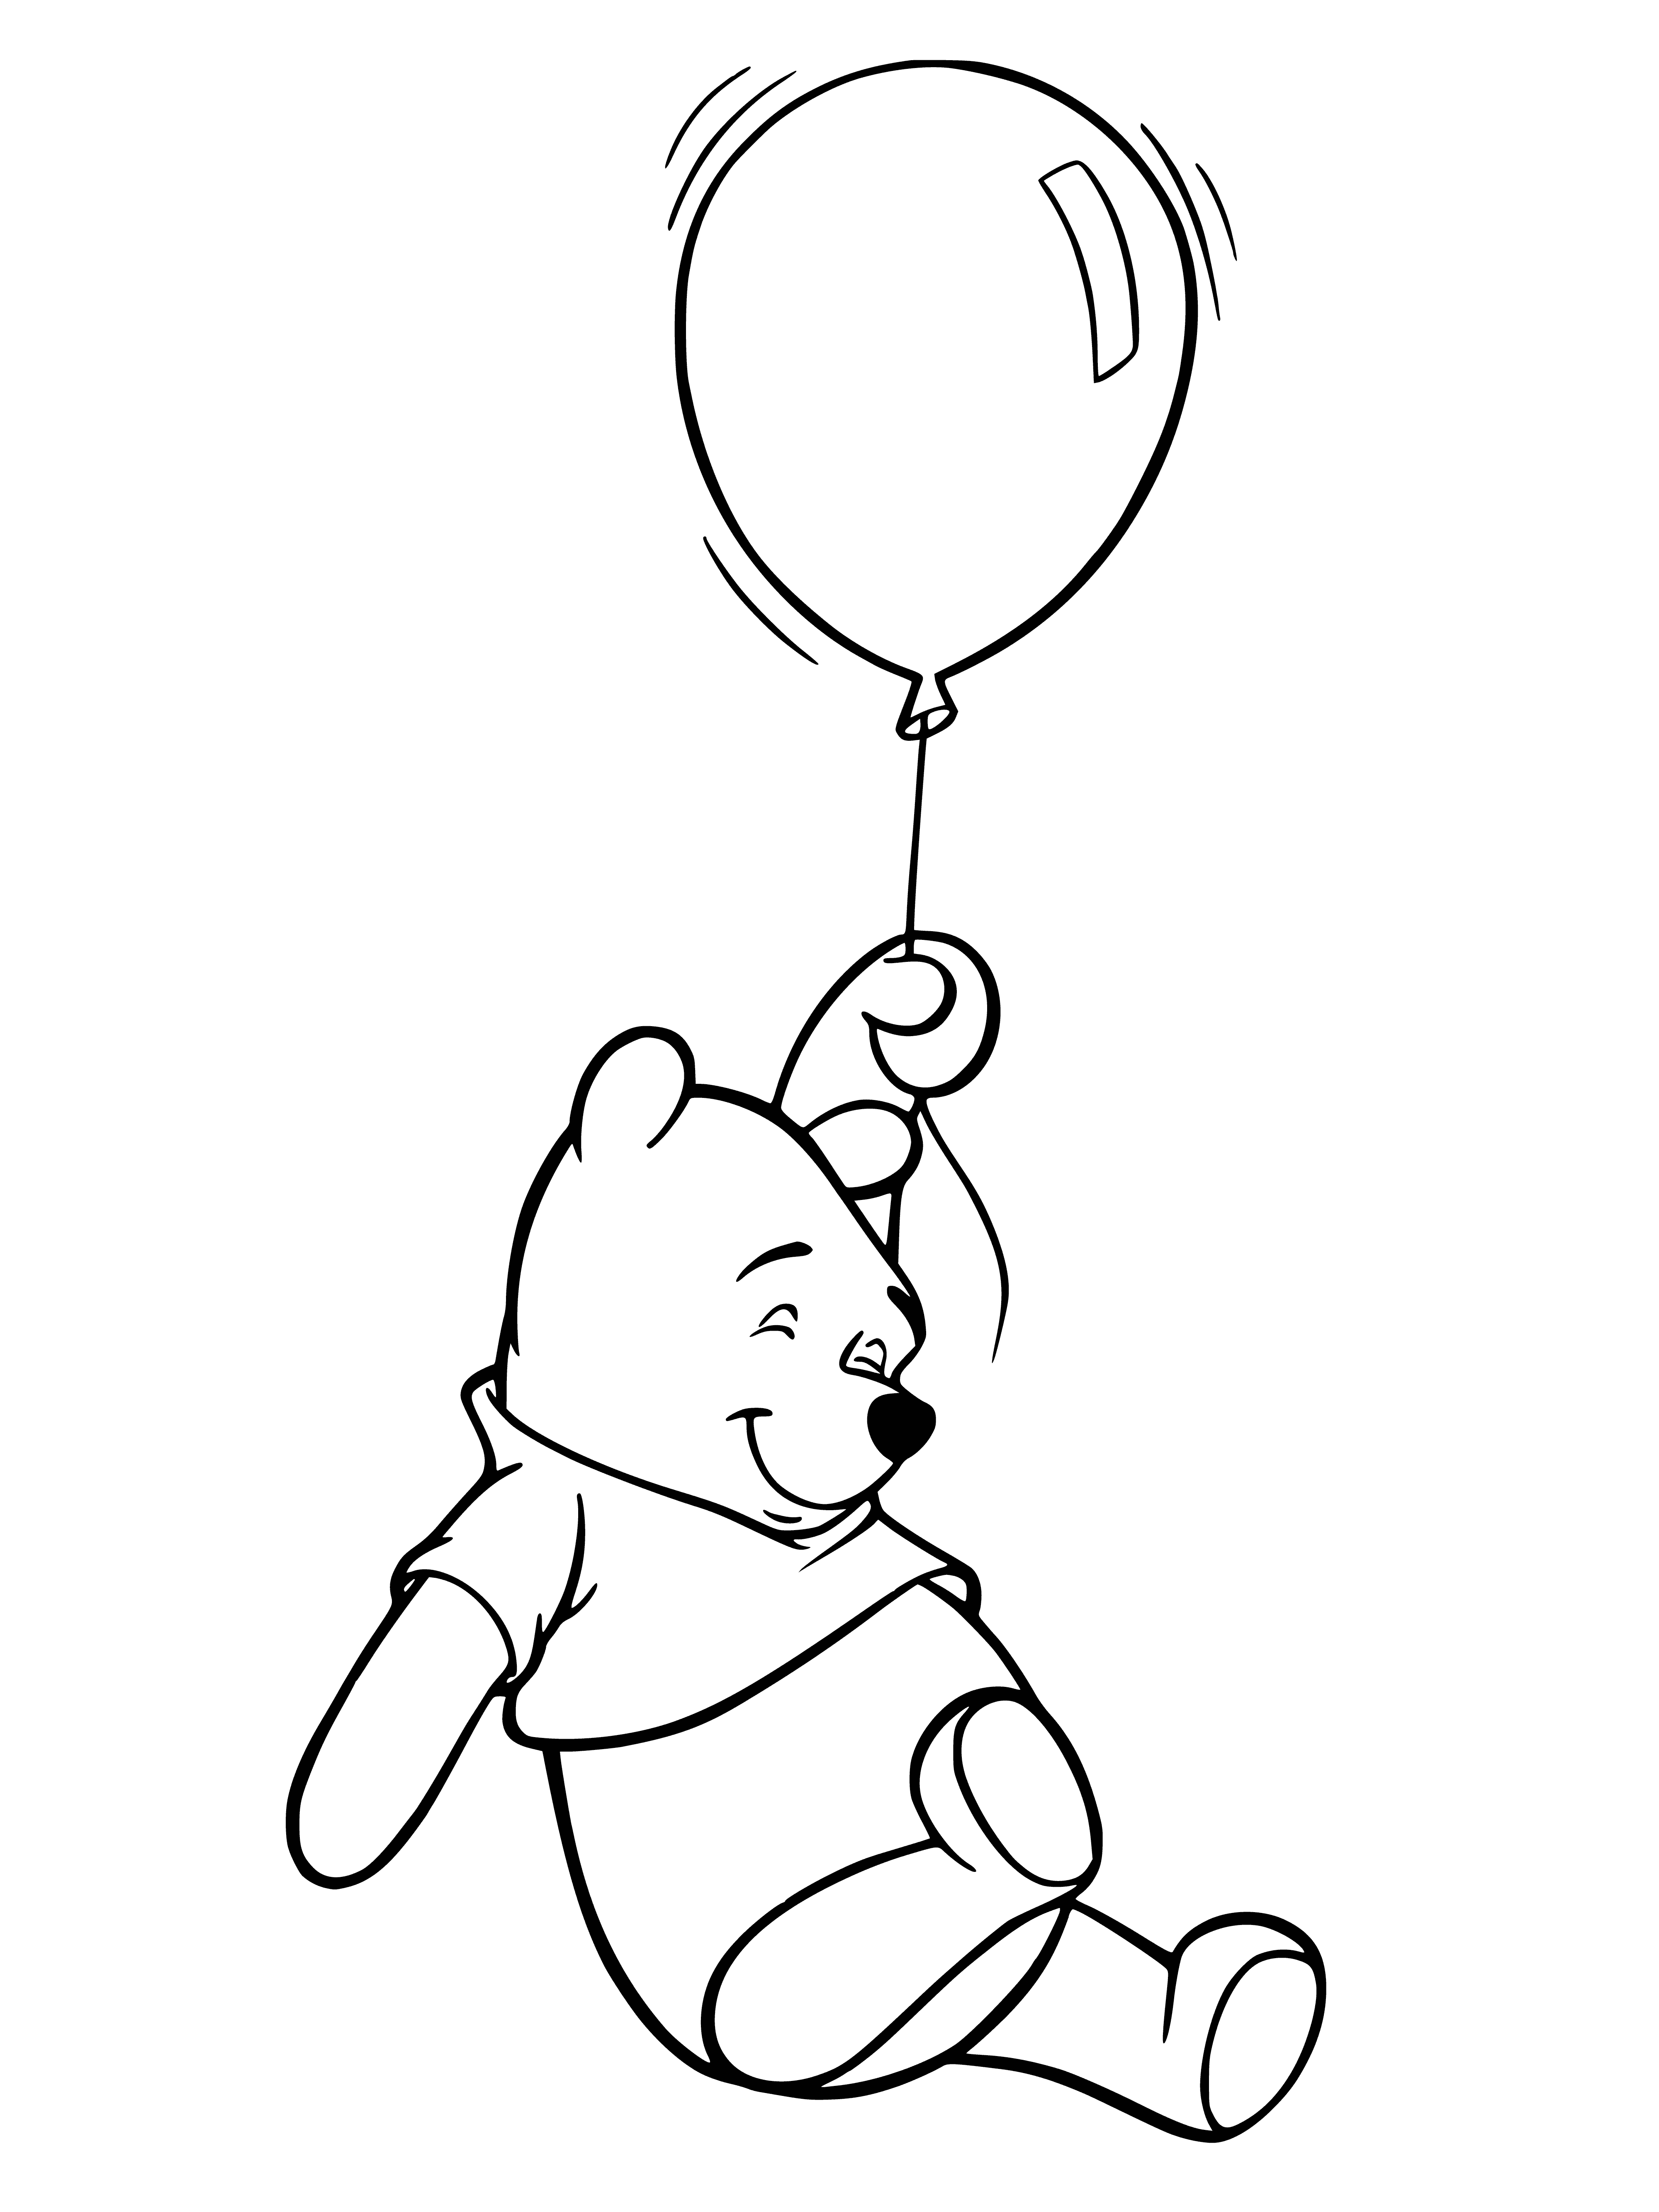 coloring page: Winnie the Pooh is flying in a red hot air balloon with a bee-covered coloring page attached by a string. #Winnie #Pooh